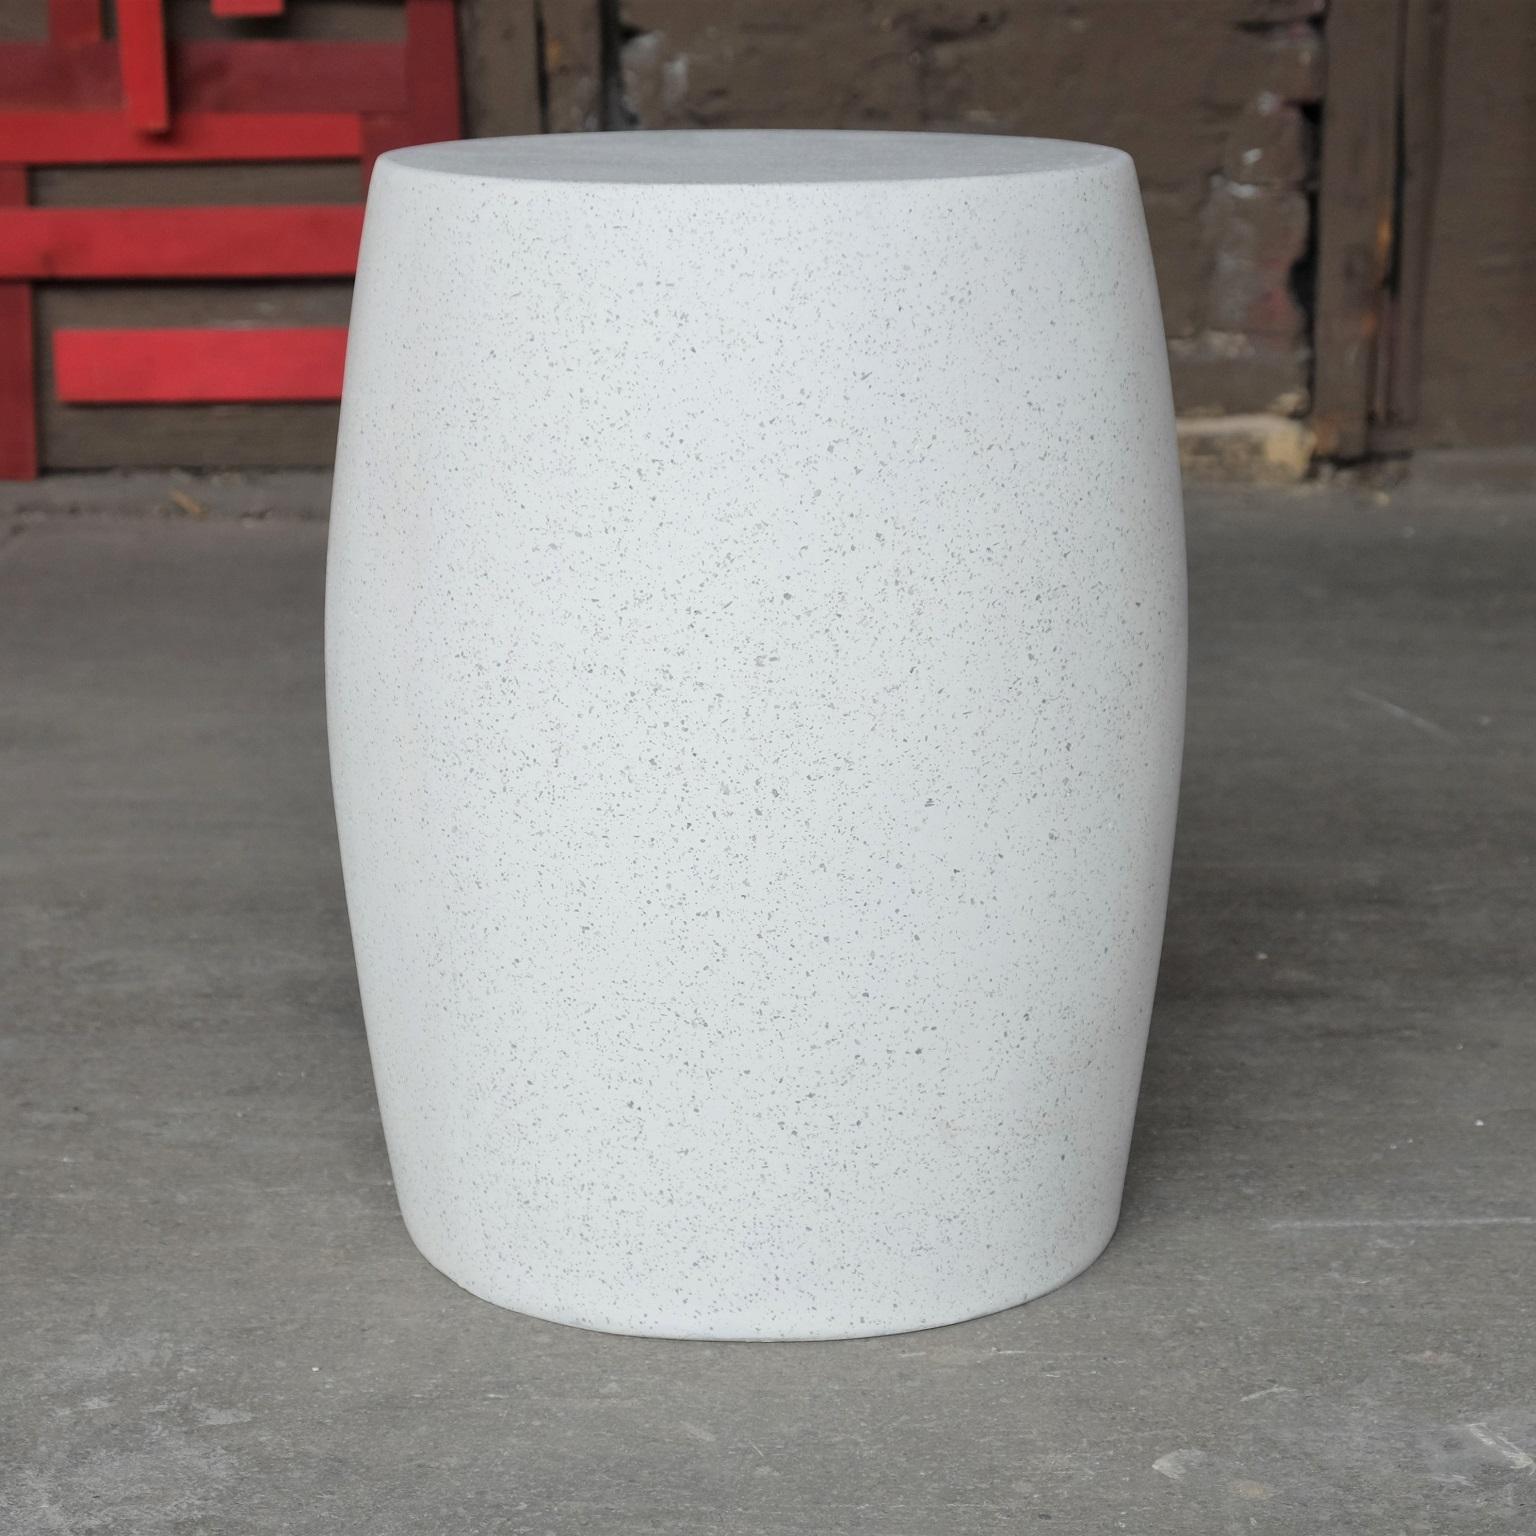 Versatility and elegance distilled into simplicity. 

Dimensions: Diameter 14 in. (35.6 cm), height 18 in. (45.7 cm)., weight 20 lbs. (9 kg)

Finish color options:
white stone (shown)
natural stone
aged stone
keystone
coal stone